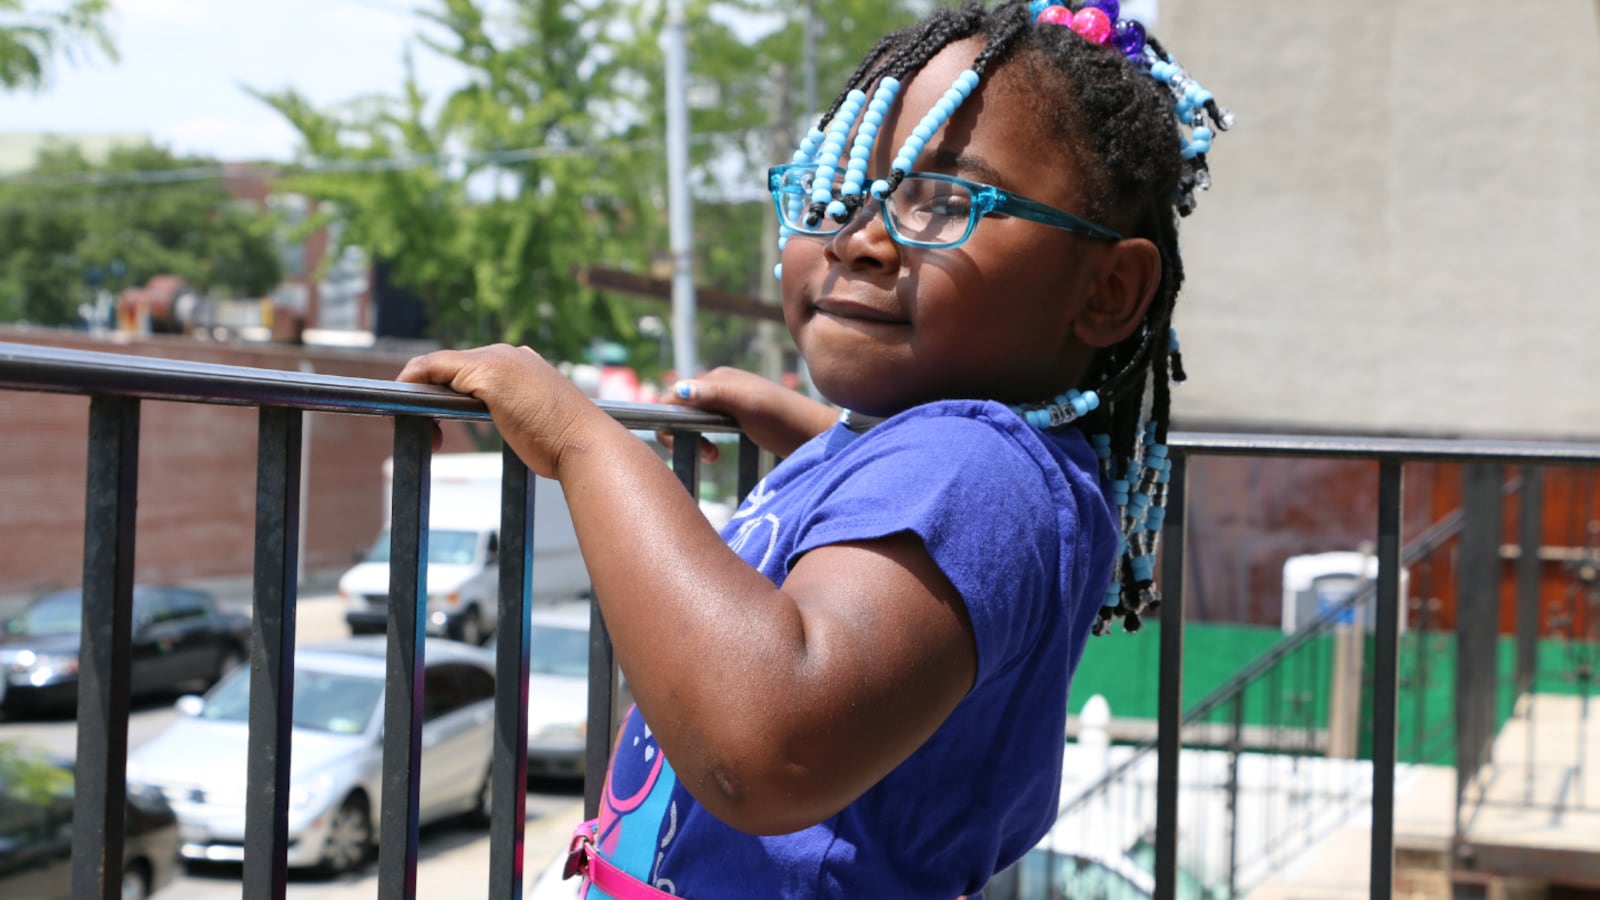 Six-year-old Amira Barrett, of New York City, waited two years for an evaluation to determine whether she has a disability and is eligible for special-education services.